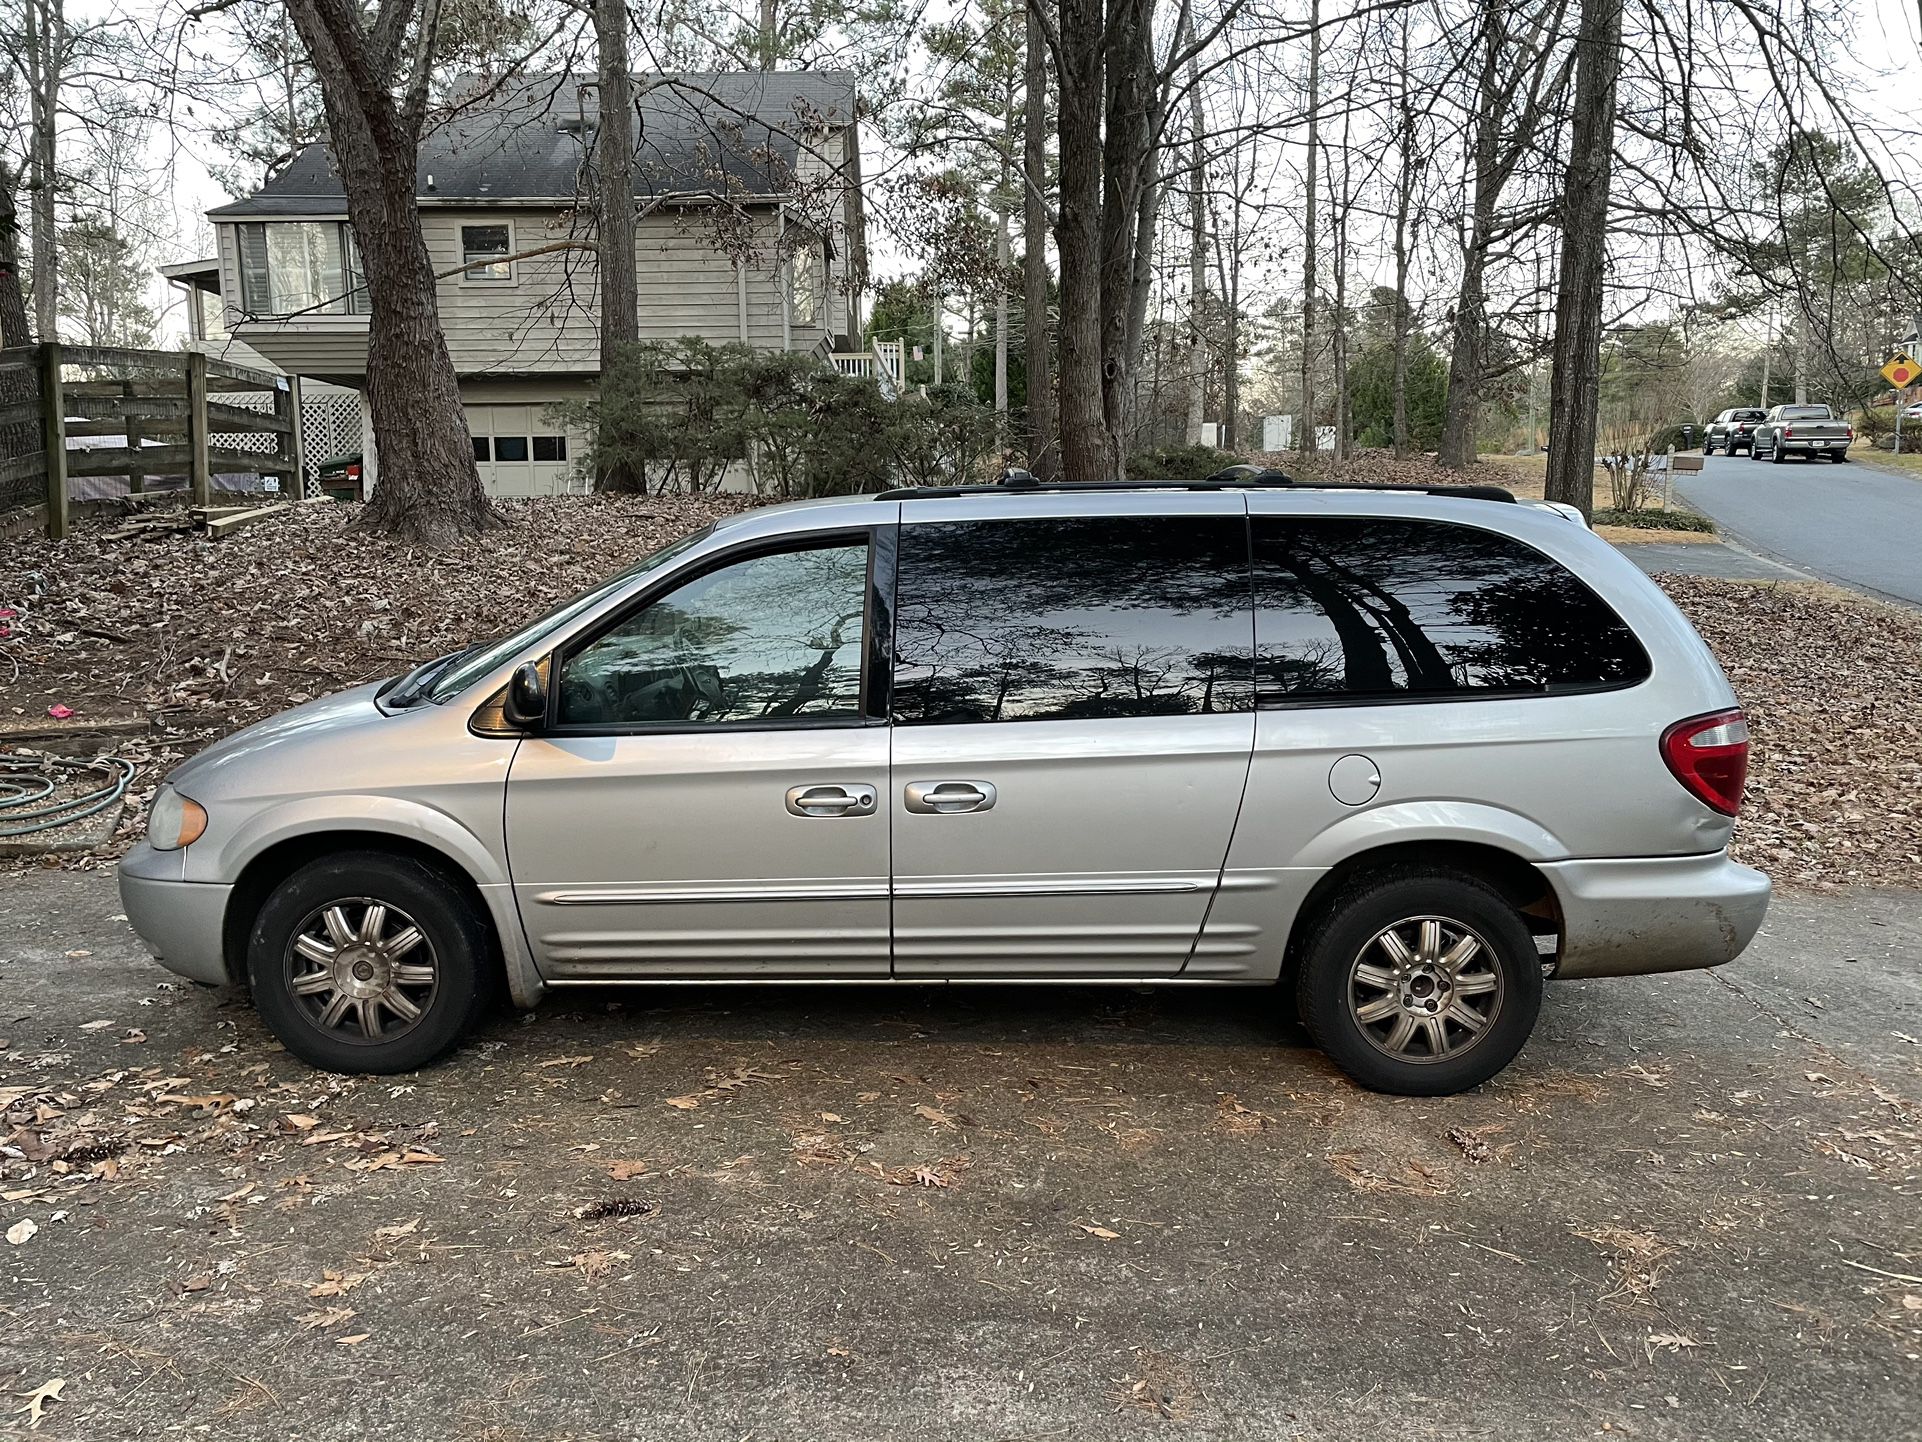 2003 Chrysler Town & Country